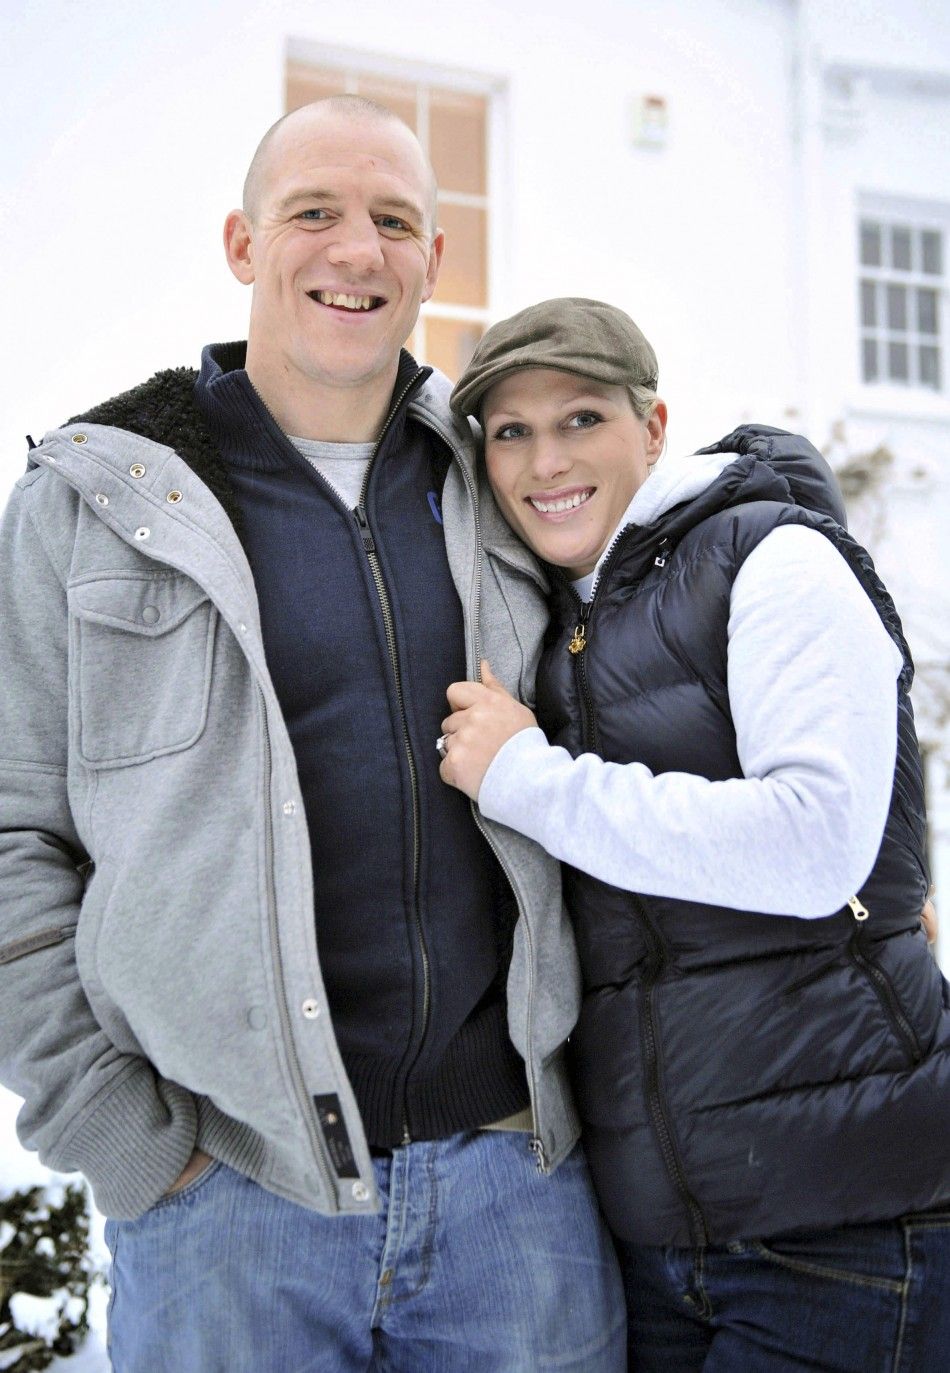 Zara Phillips and her fiance Mike Tindall pose for photographs at their home in Gloucestershire, south-west England 